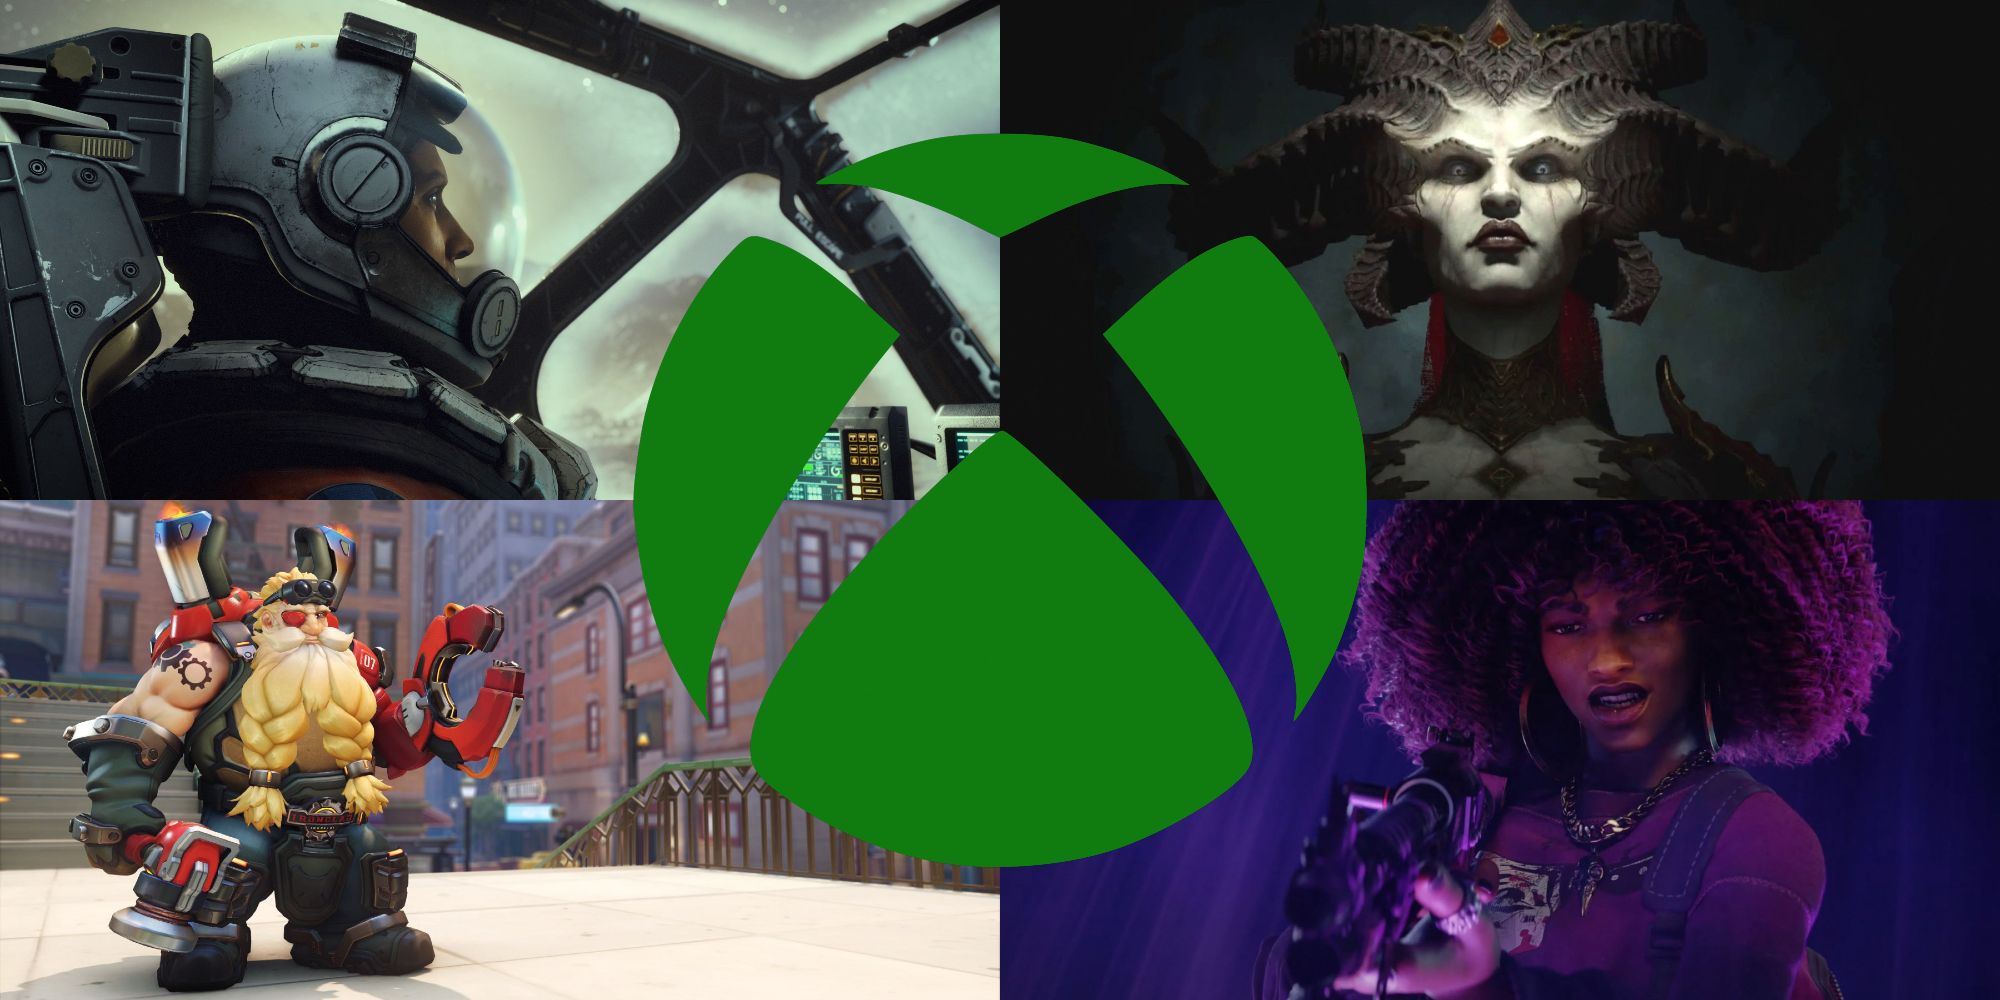 Xbox has plenty of upcoming first party games after its acquisitions, including Starfield, Diablo, Redfall, Overwatch